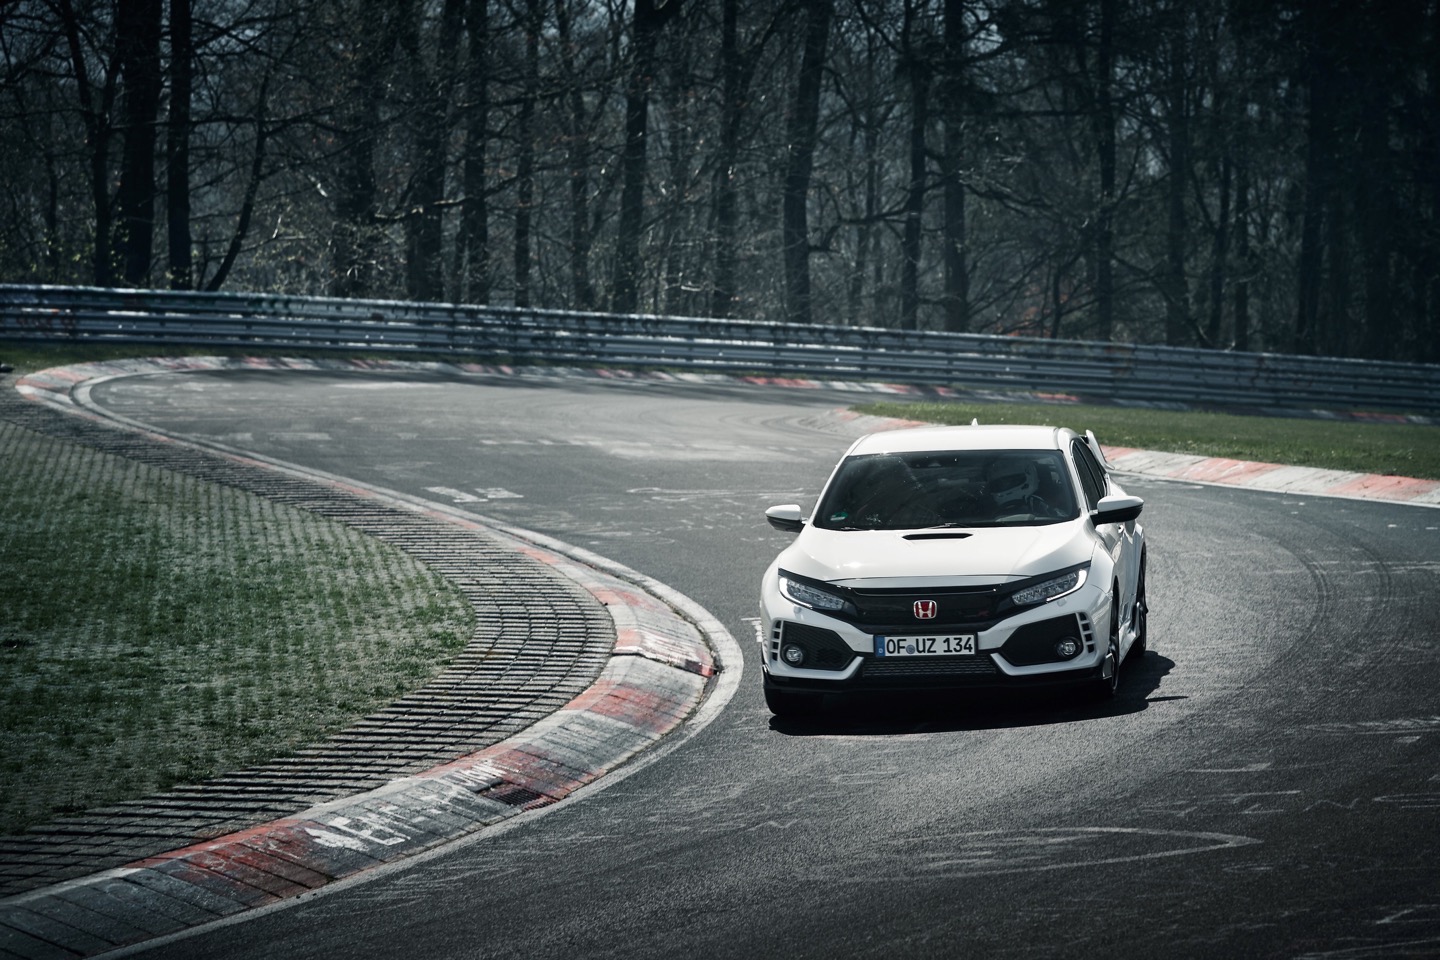 The Honda Civic Type R sets a new FWD record on the Nurburgring [+video